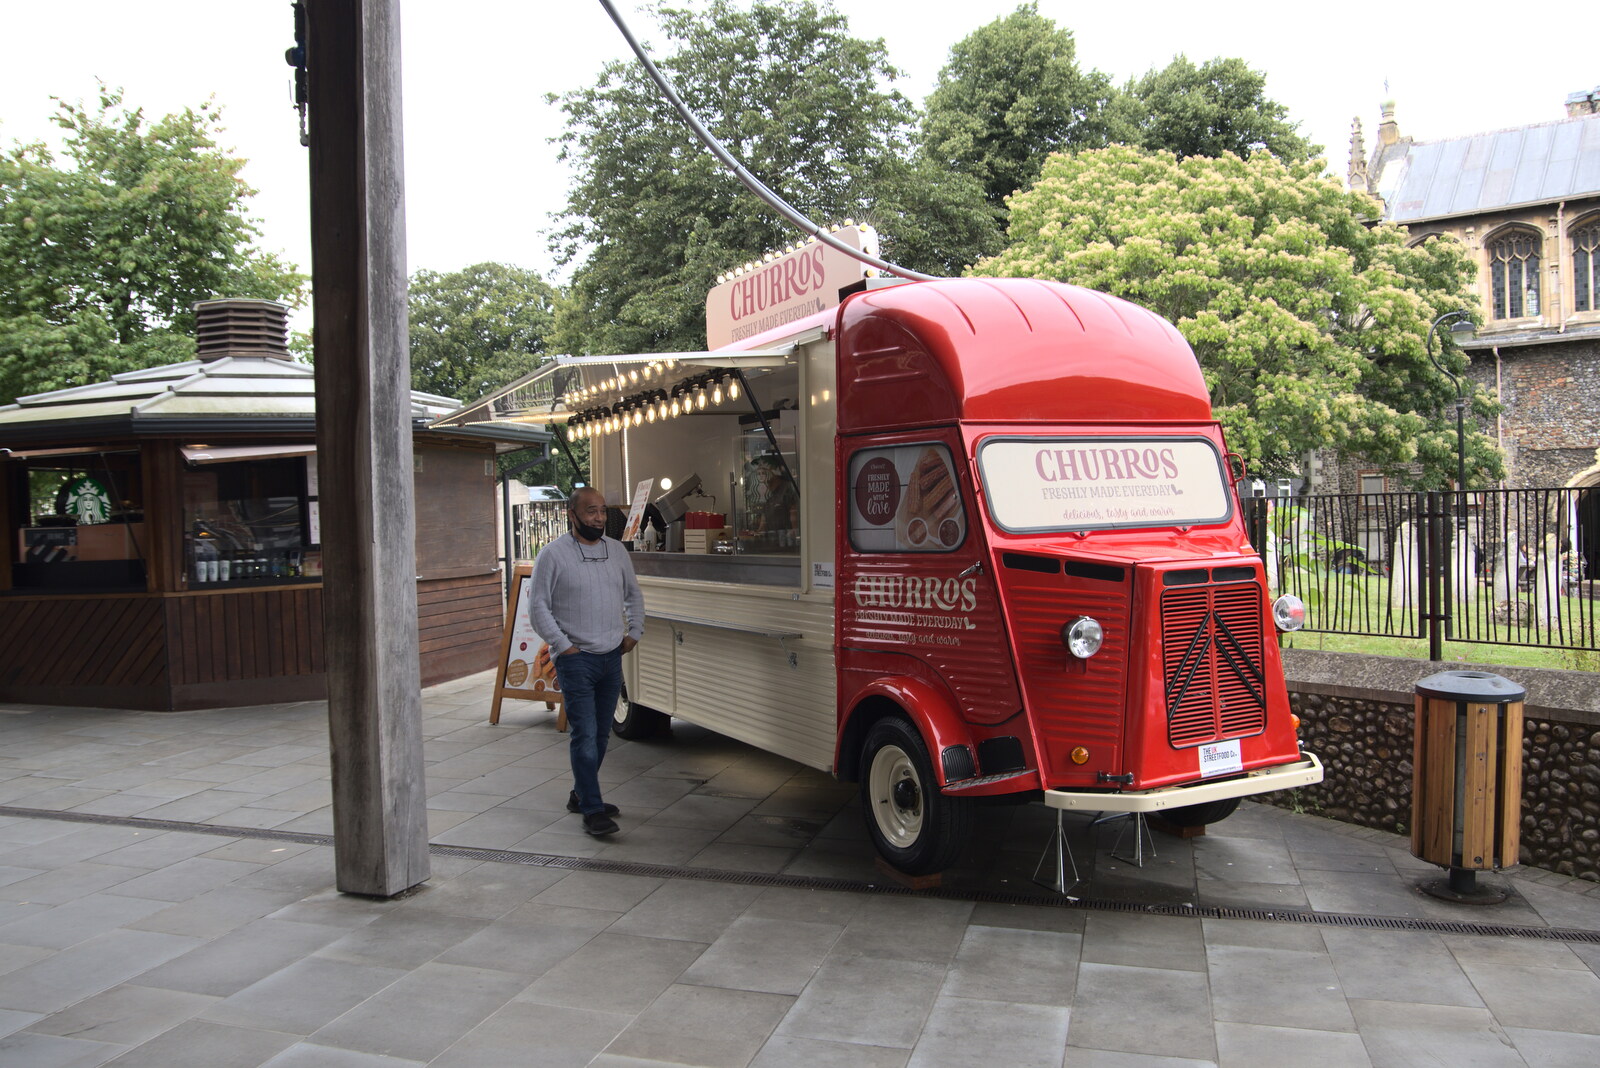 A mobile Churros van outside Chapelfield from Dippy and the City Dinosaur Trail, Norwich, Norfolk - 19th August 2021